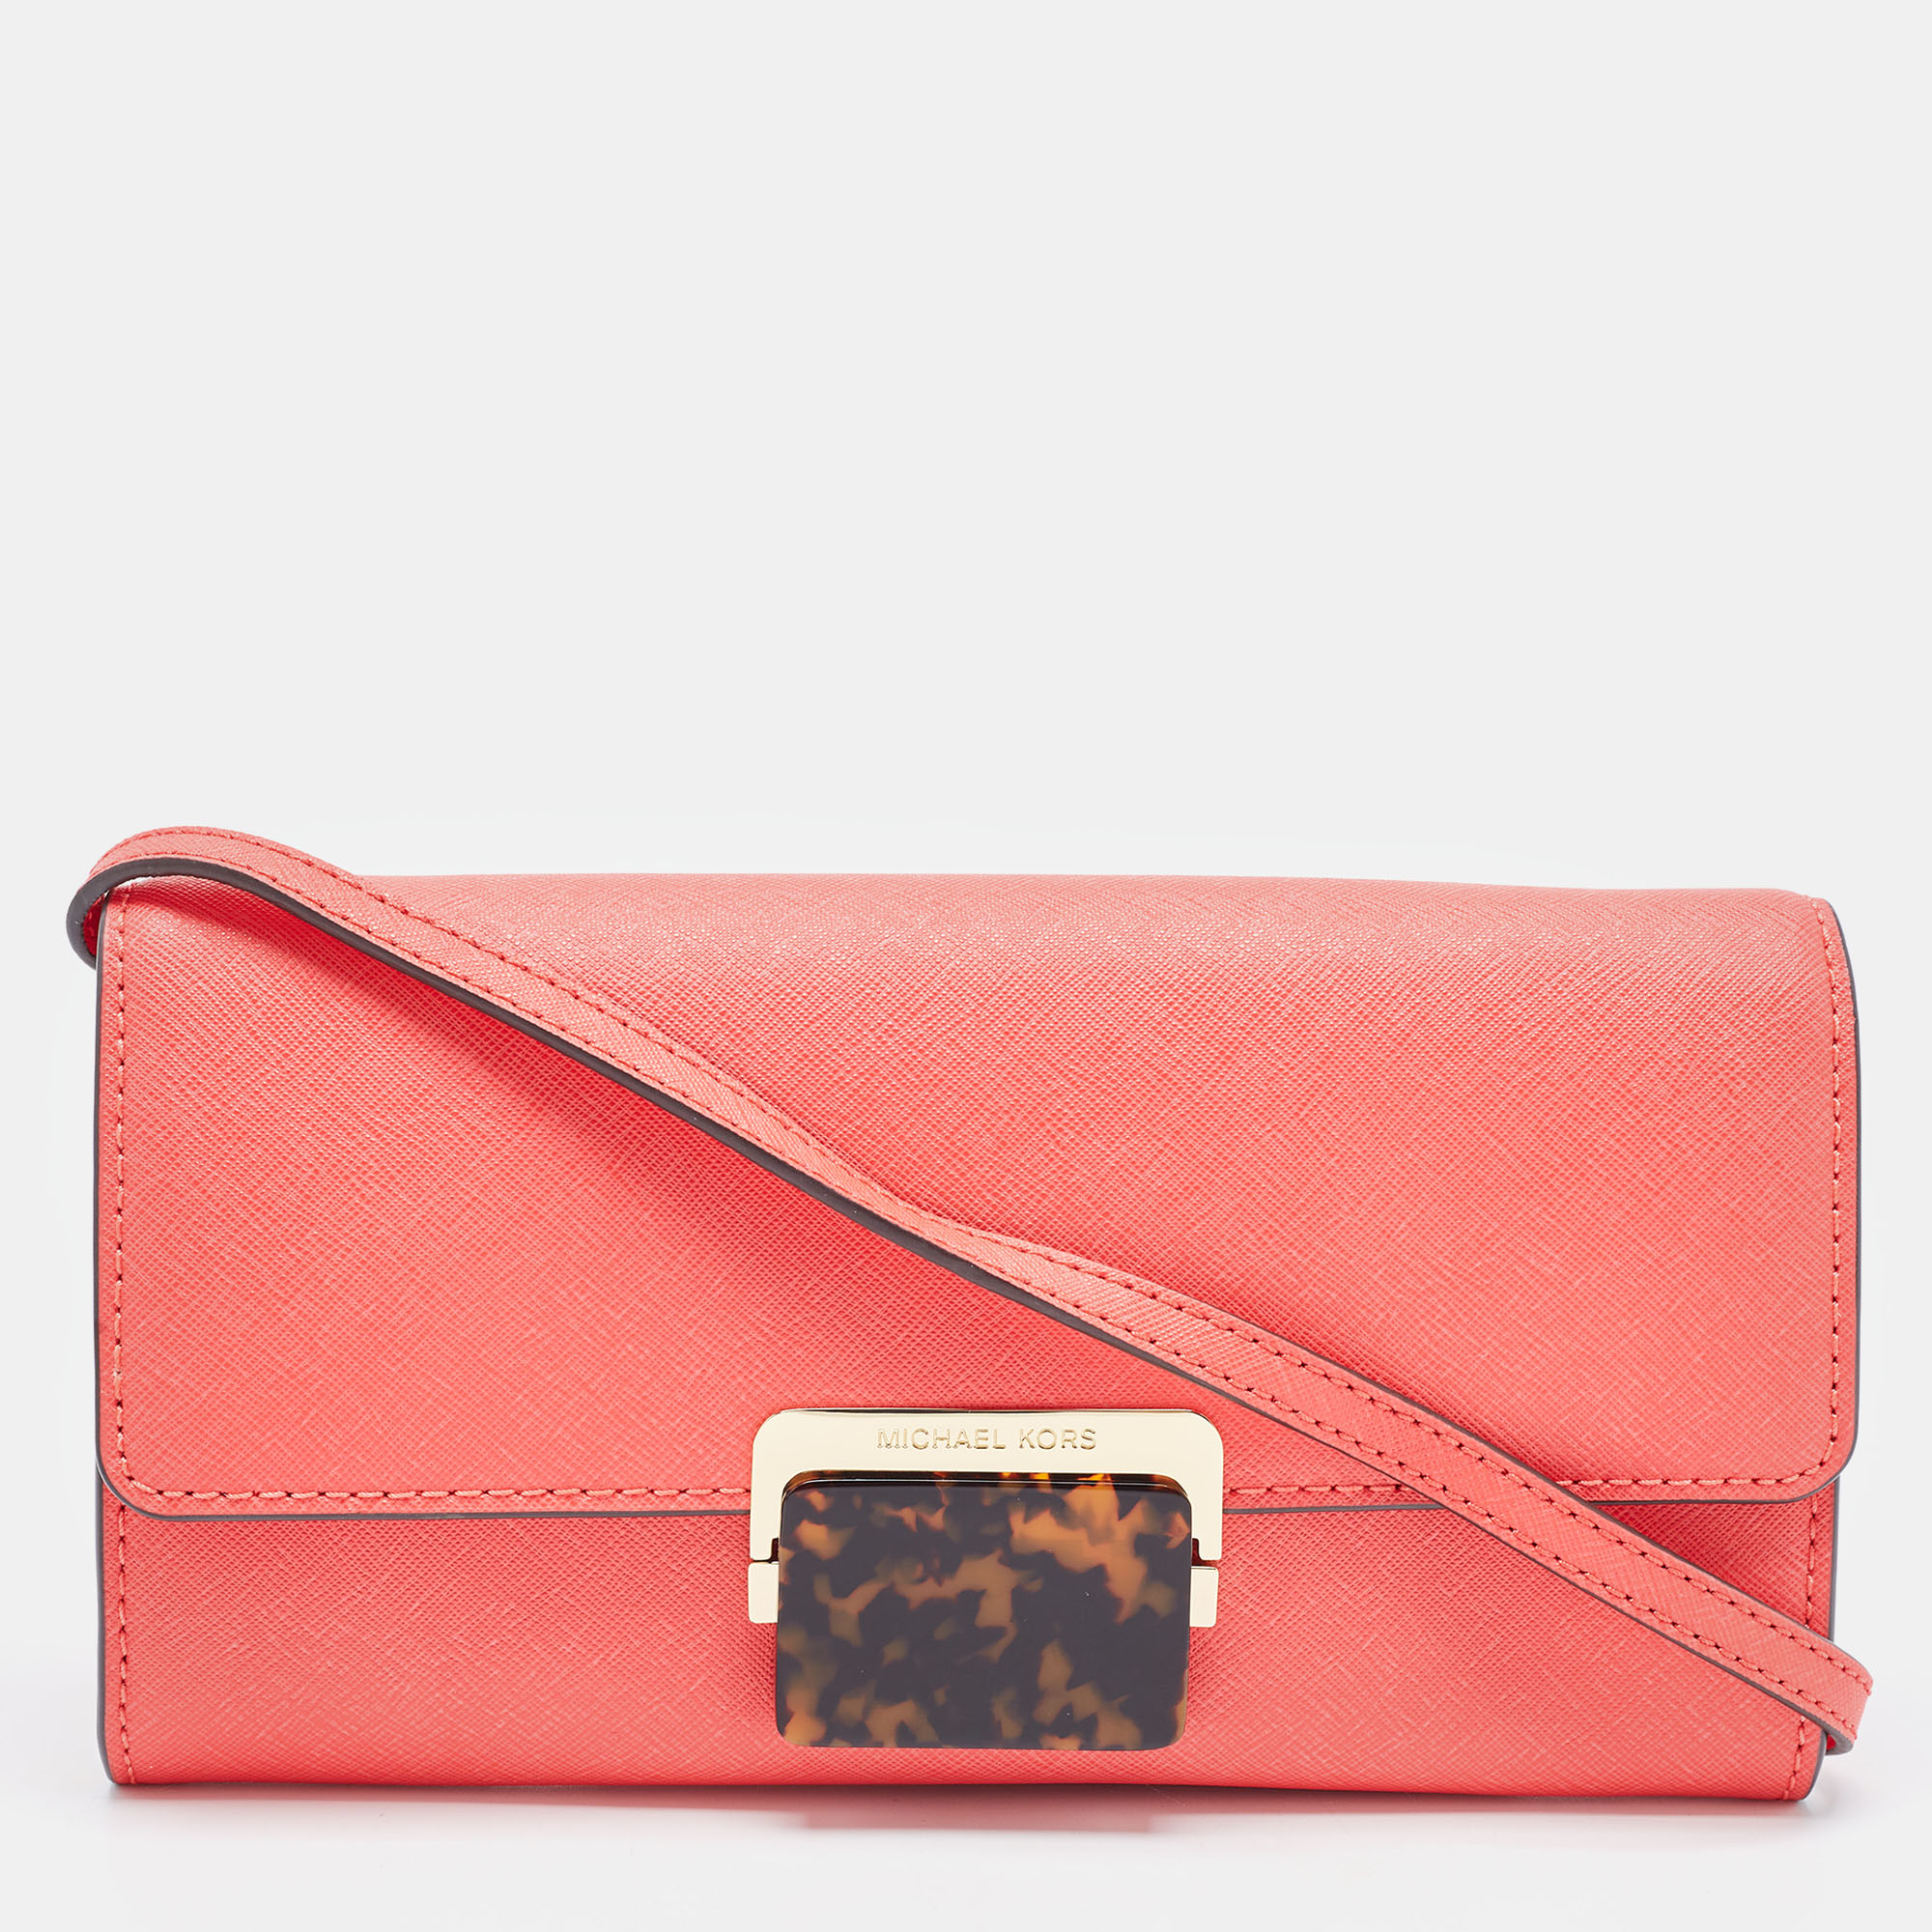 Pre-owned Michael Kors Coral Saffiano Leather Cynthia Clutch In Orange